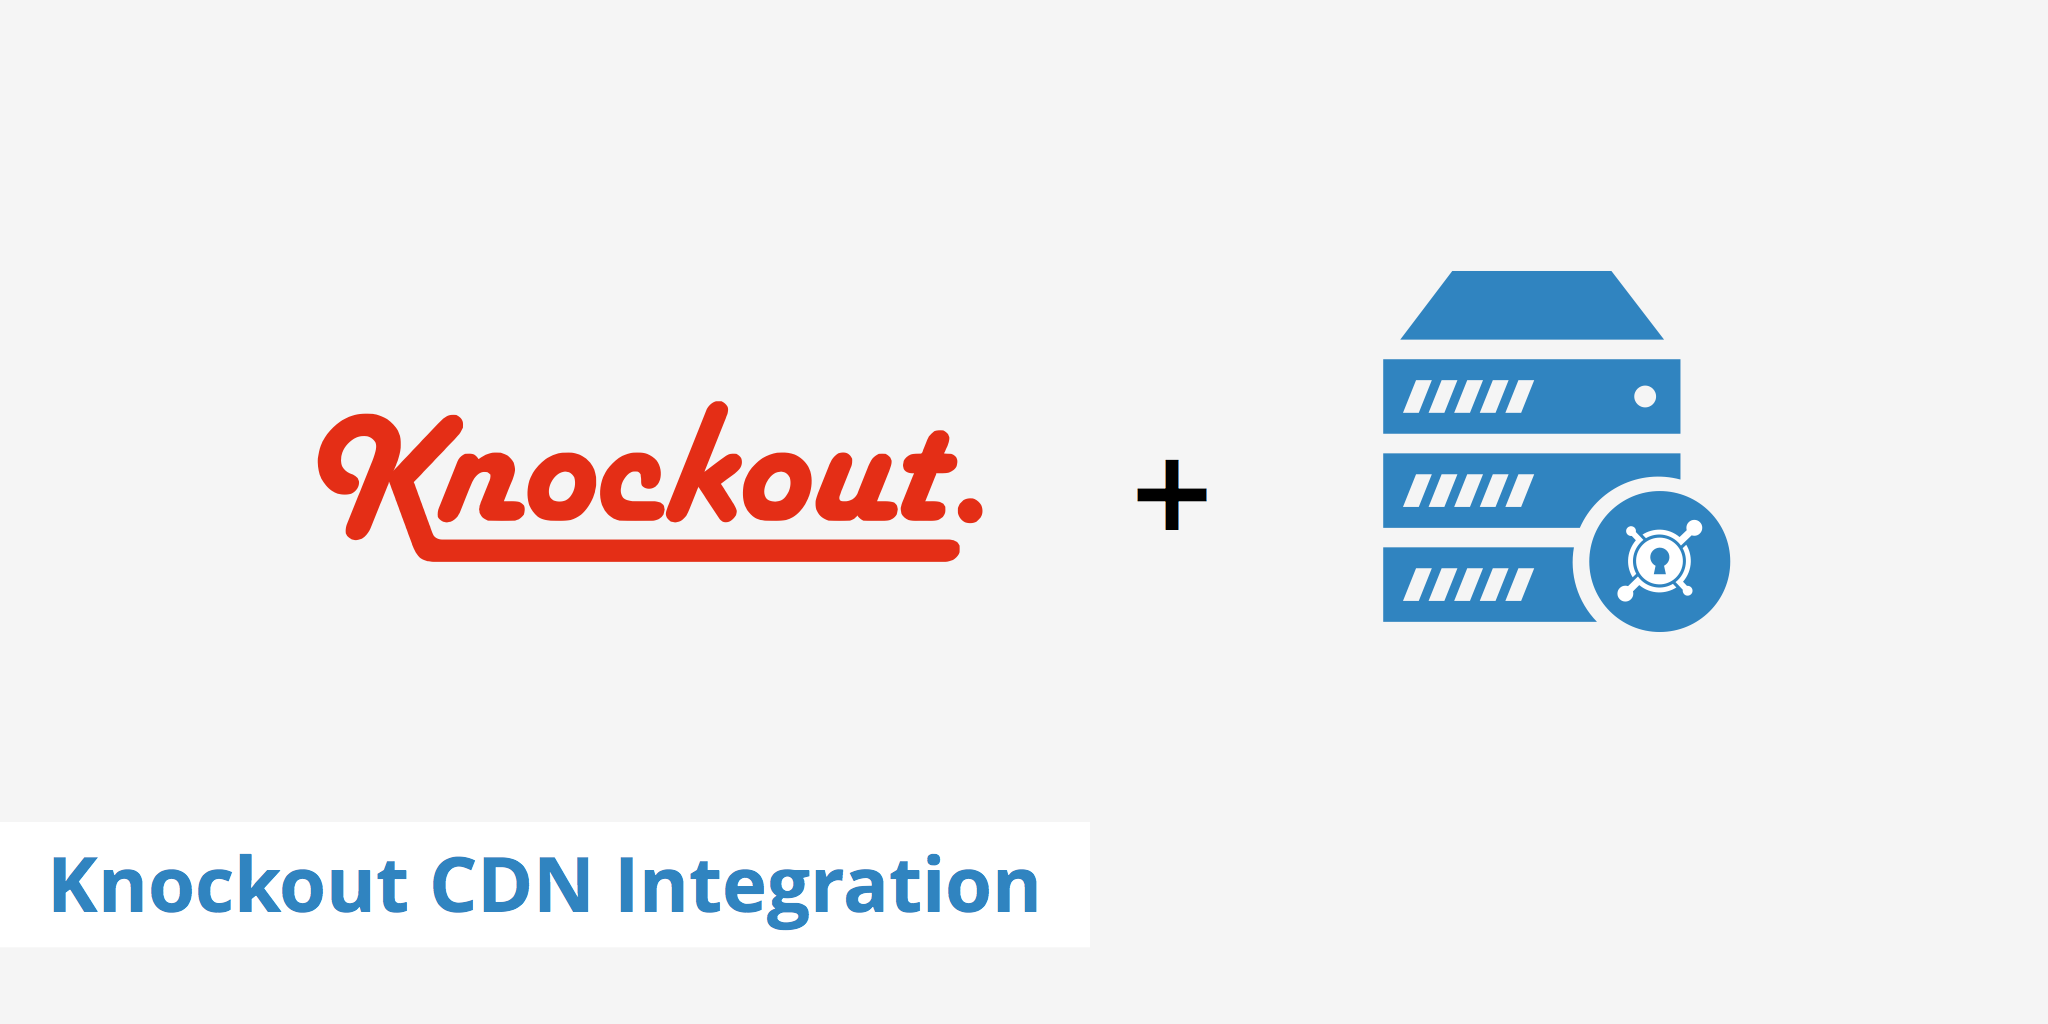 Using a Knockout CDN Combination